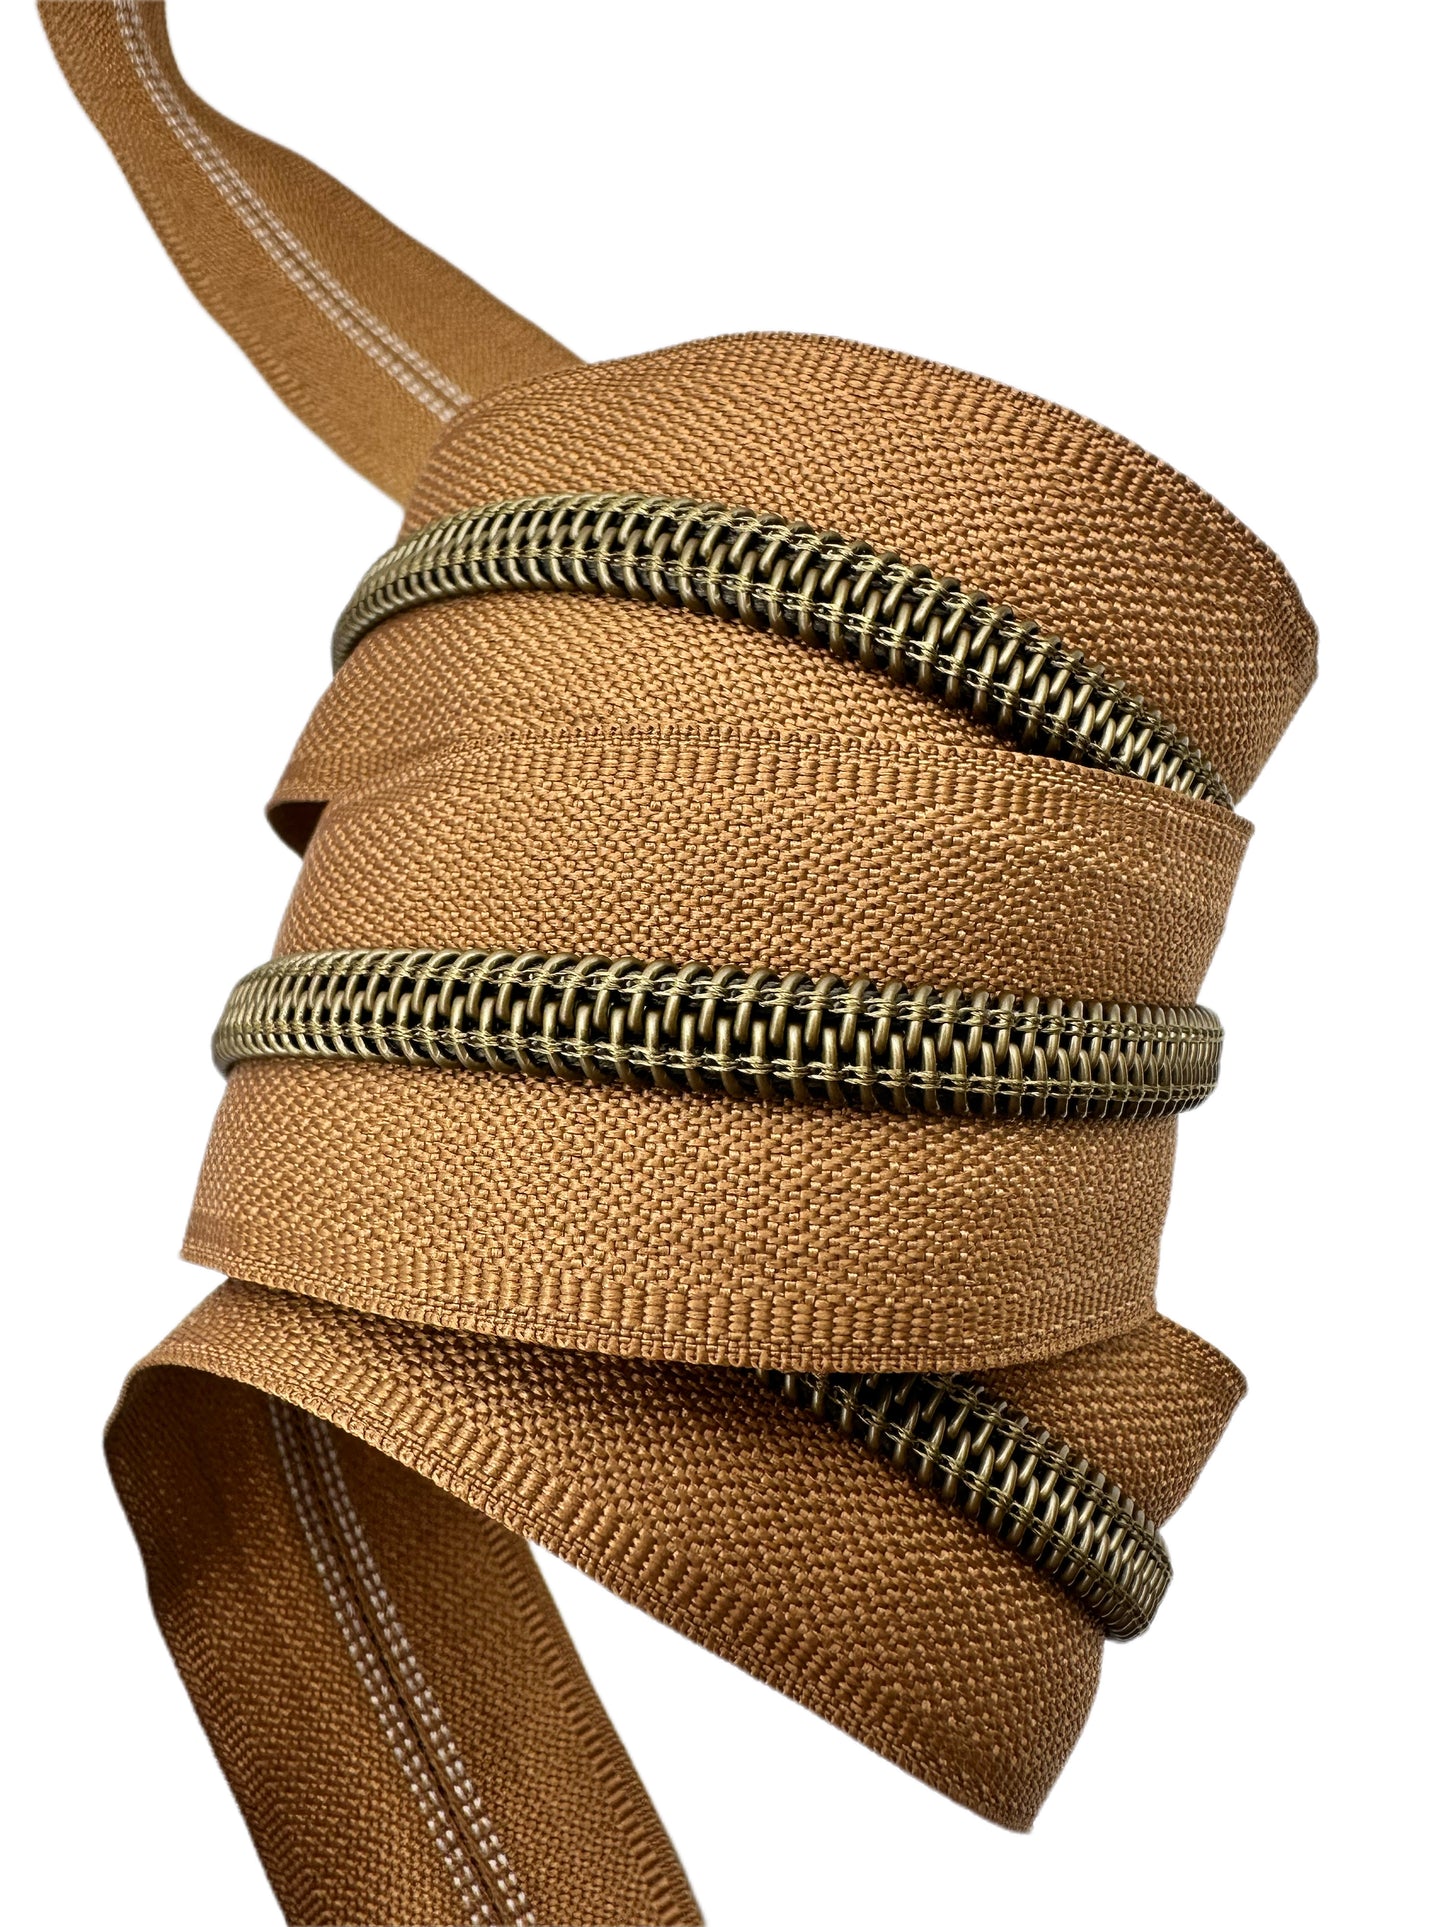 Camel zipper tape with antique teeth